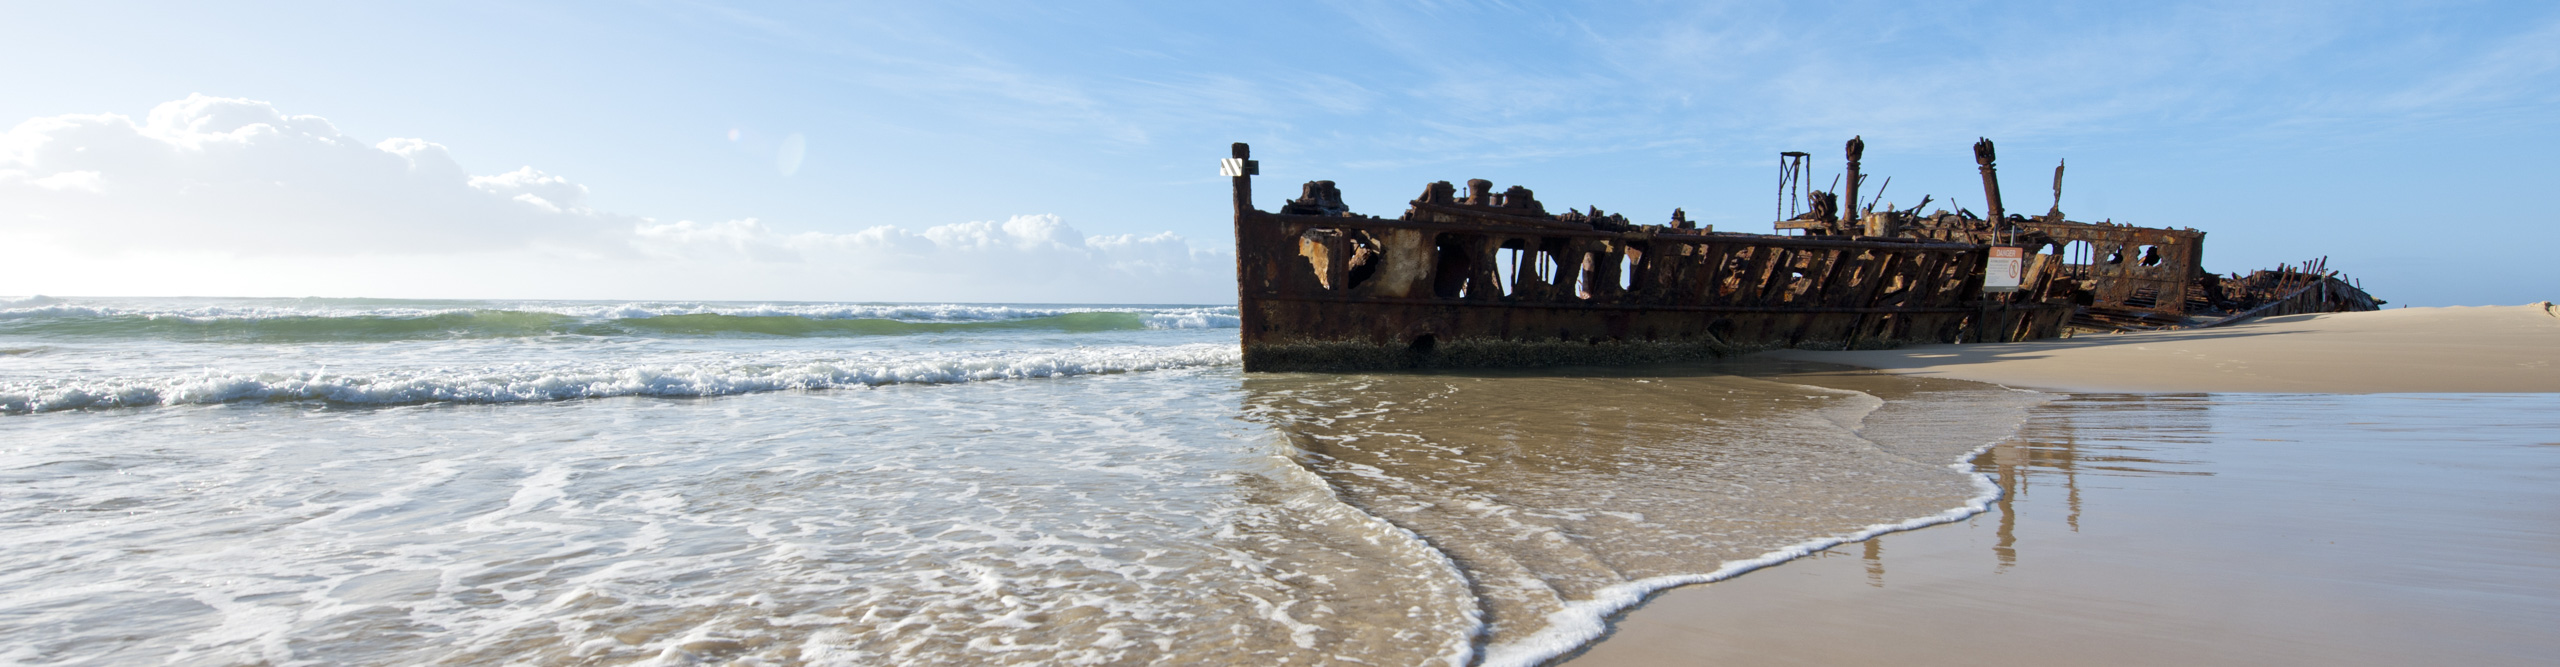 Shipwreck on Fraser Island in the late afternoon sun, Queensland, Australia 